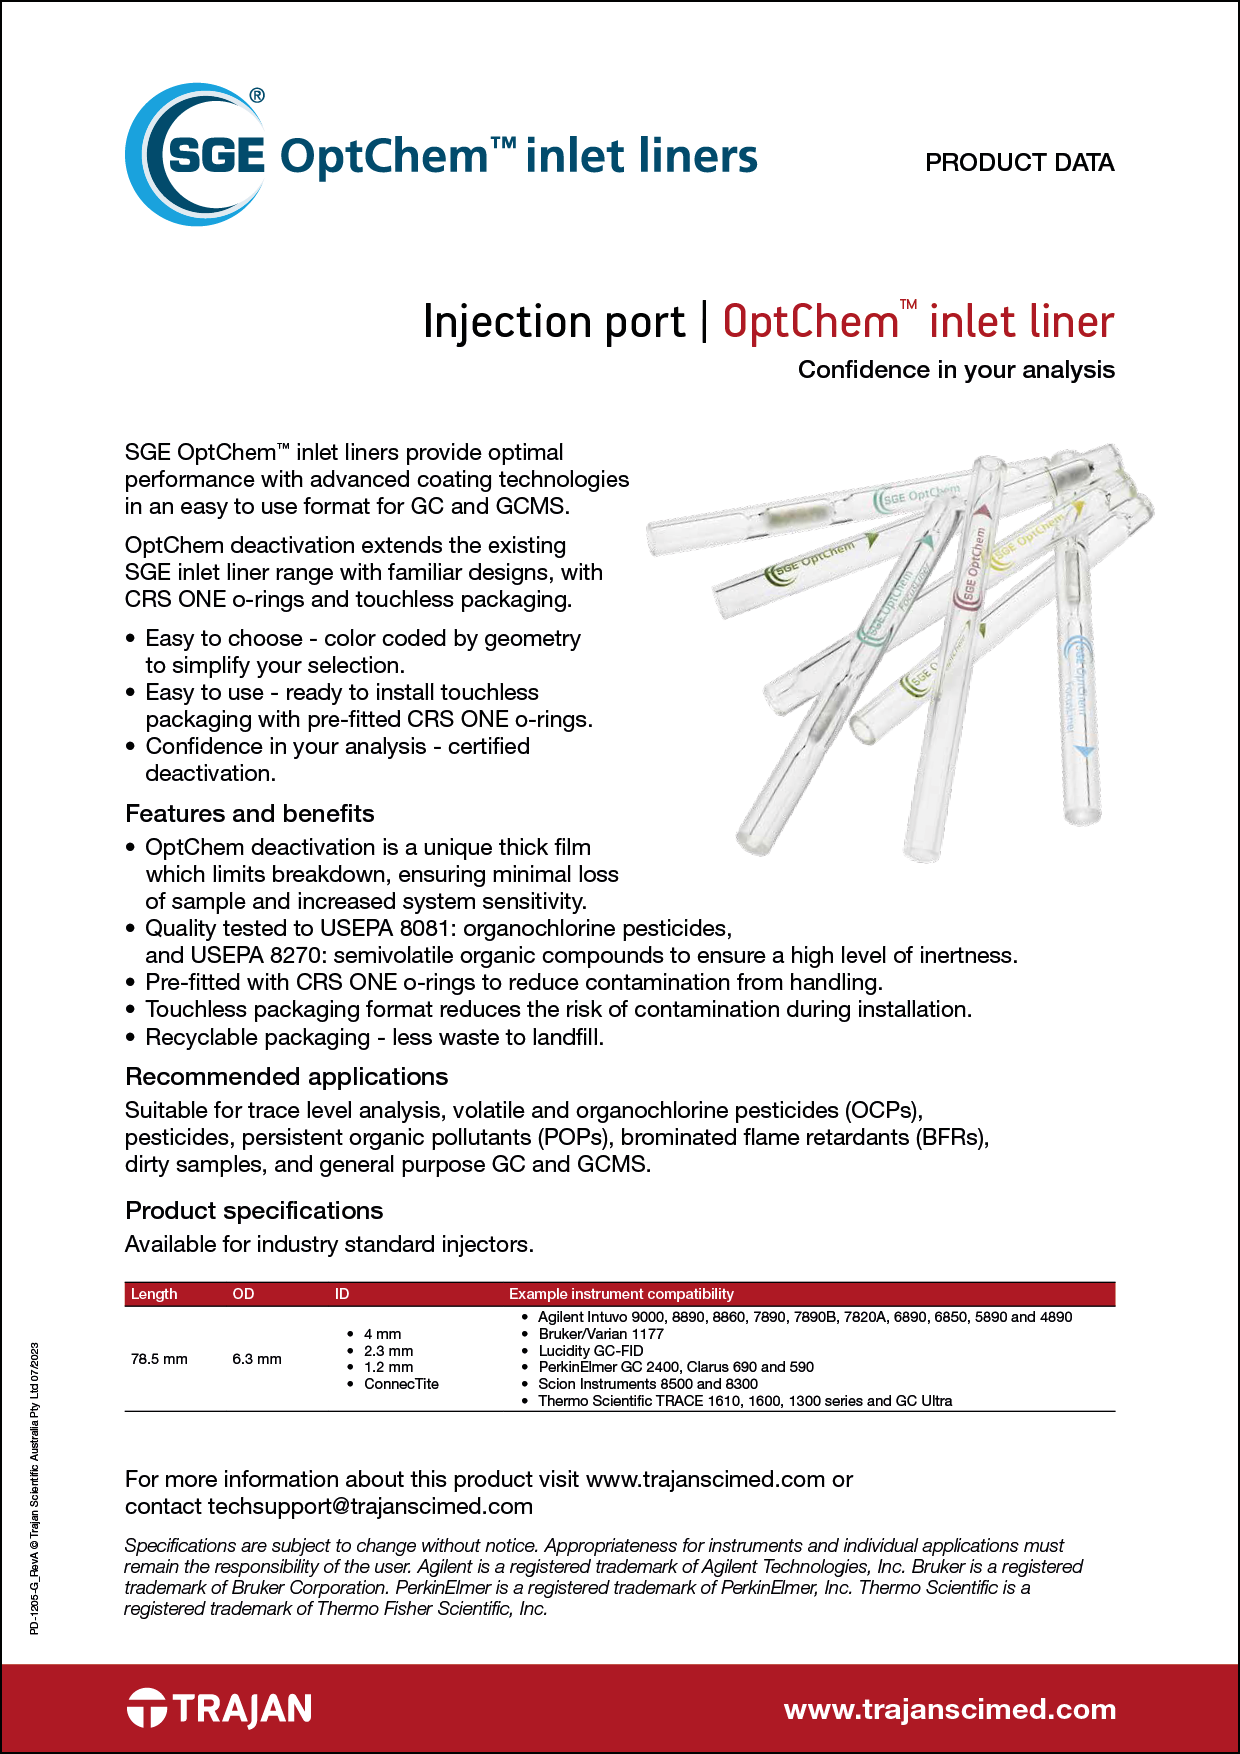 Product Data Sheet - SGE OptChem inlet liners